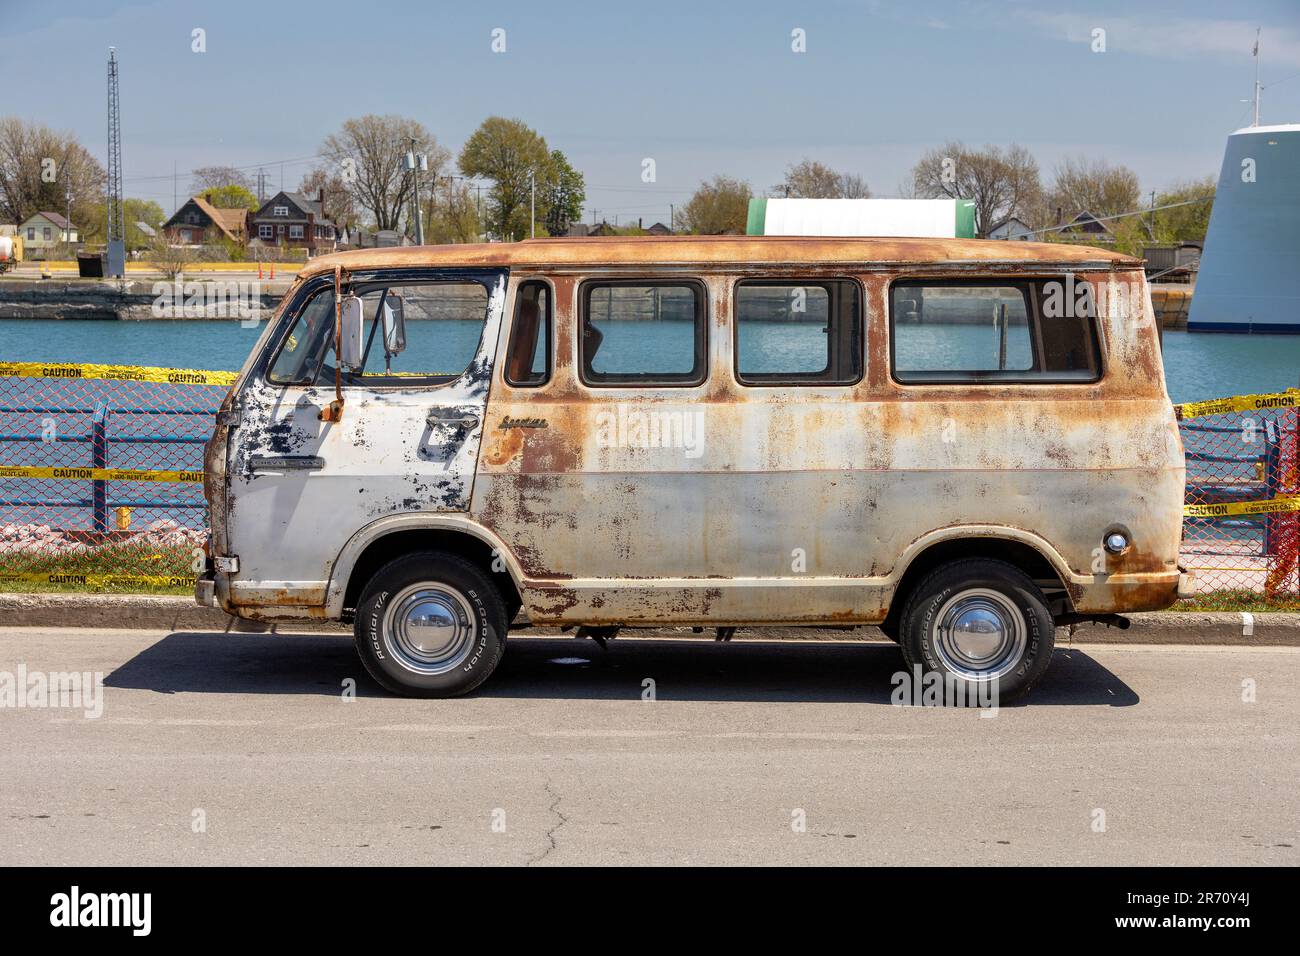 1966 Chevy Sportvan Deluxe Rusted A Renovation Project Needs Paint Parked In Port Colborne Ontario Canada Retro Minivan Microvan Stock Photo